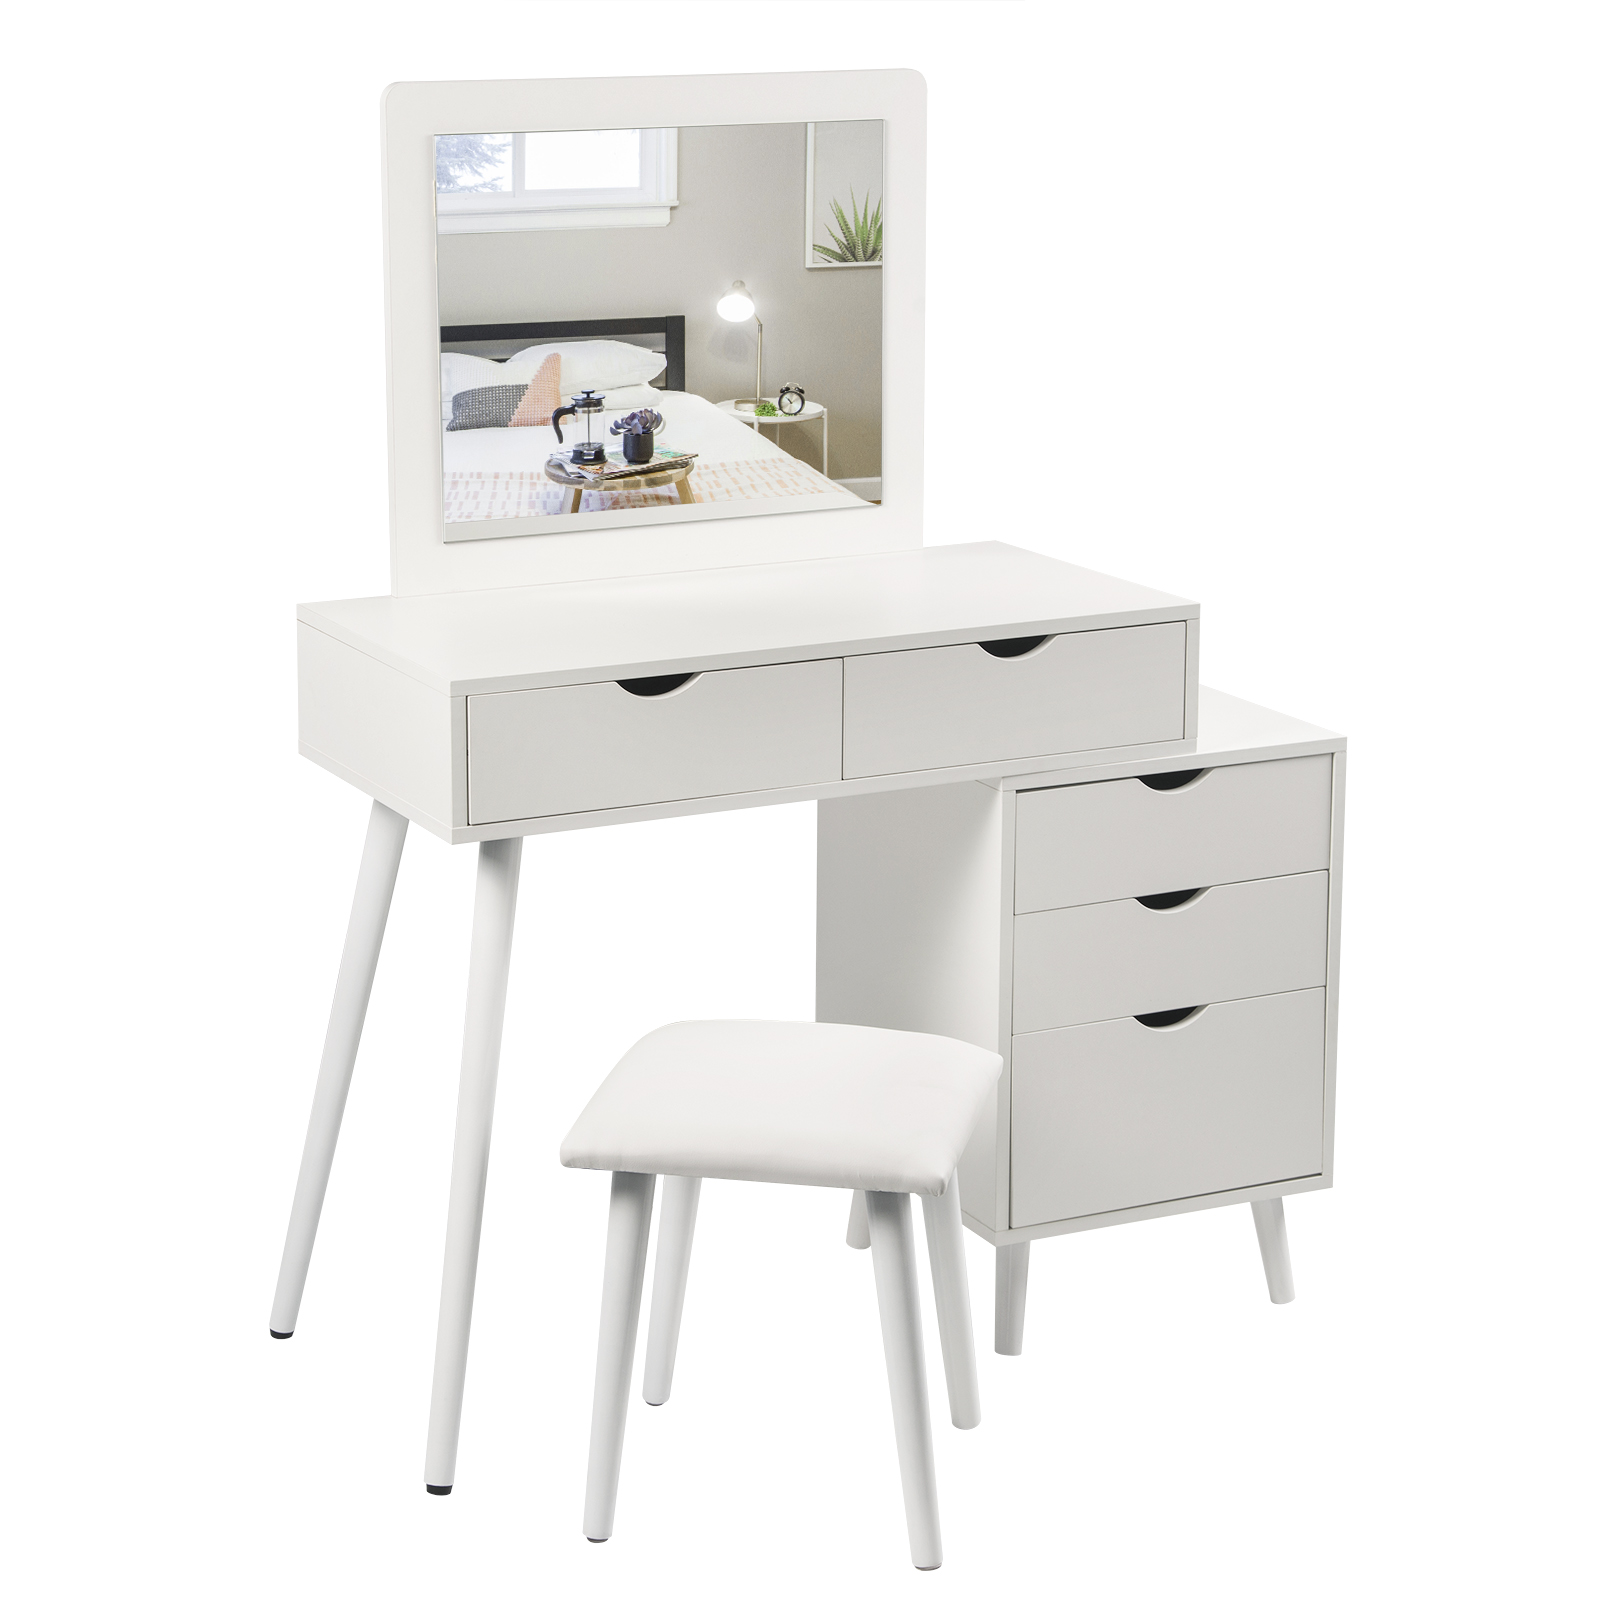 1set Cosmetic Dressing Table, Small Vanity Mirror For Dressing Table